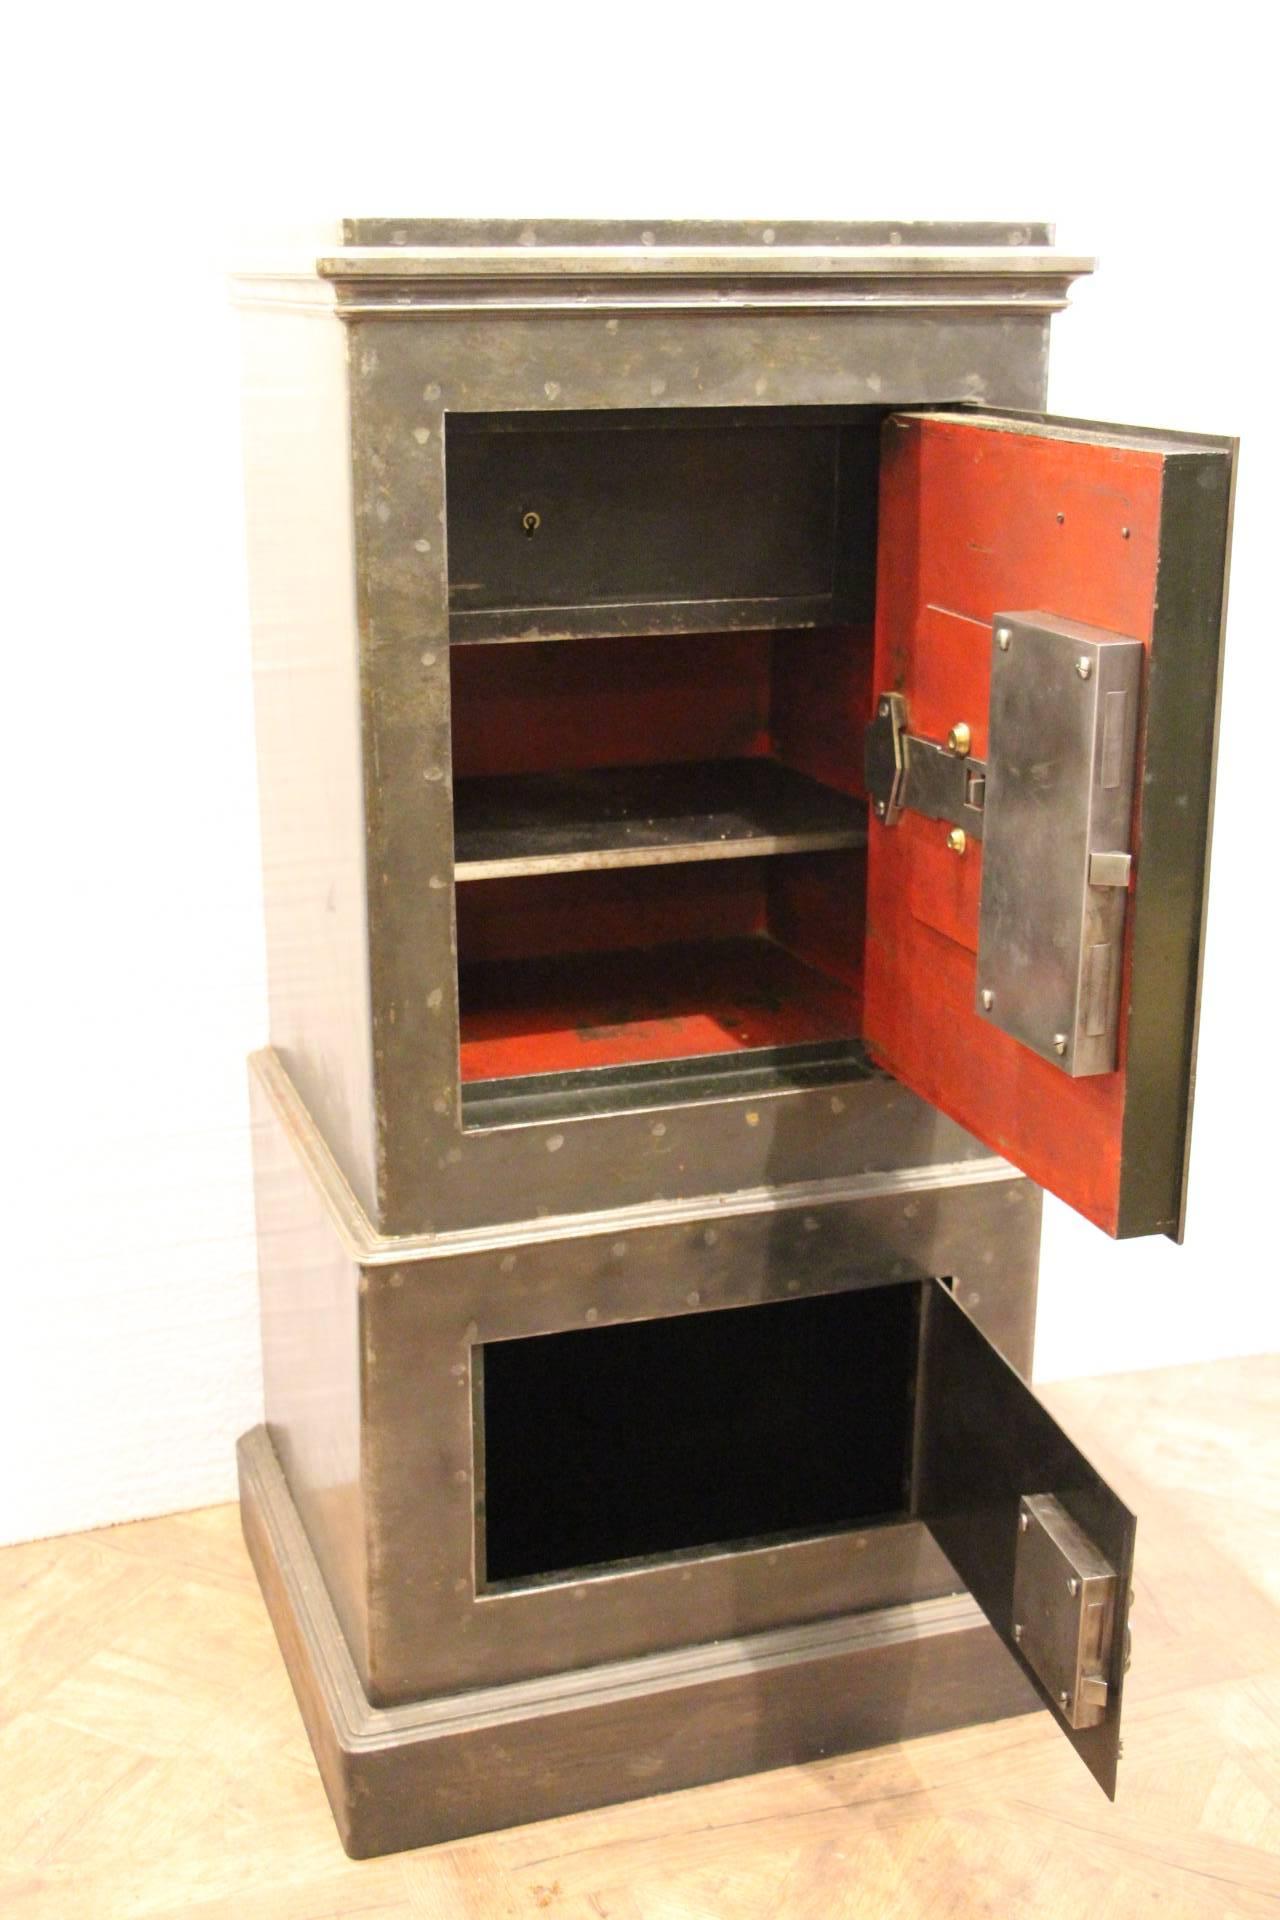 Beautiful French steel and iron safe opening with its keys and its 4 letters' combination. Fully functional. It features two doors, one on the top and another one in its base. 
The top door reveals a very sturdy mechanism closing thanks to an